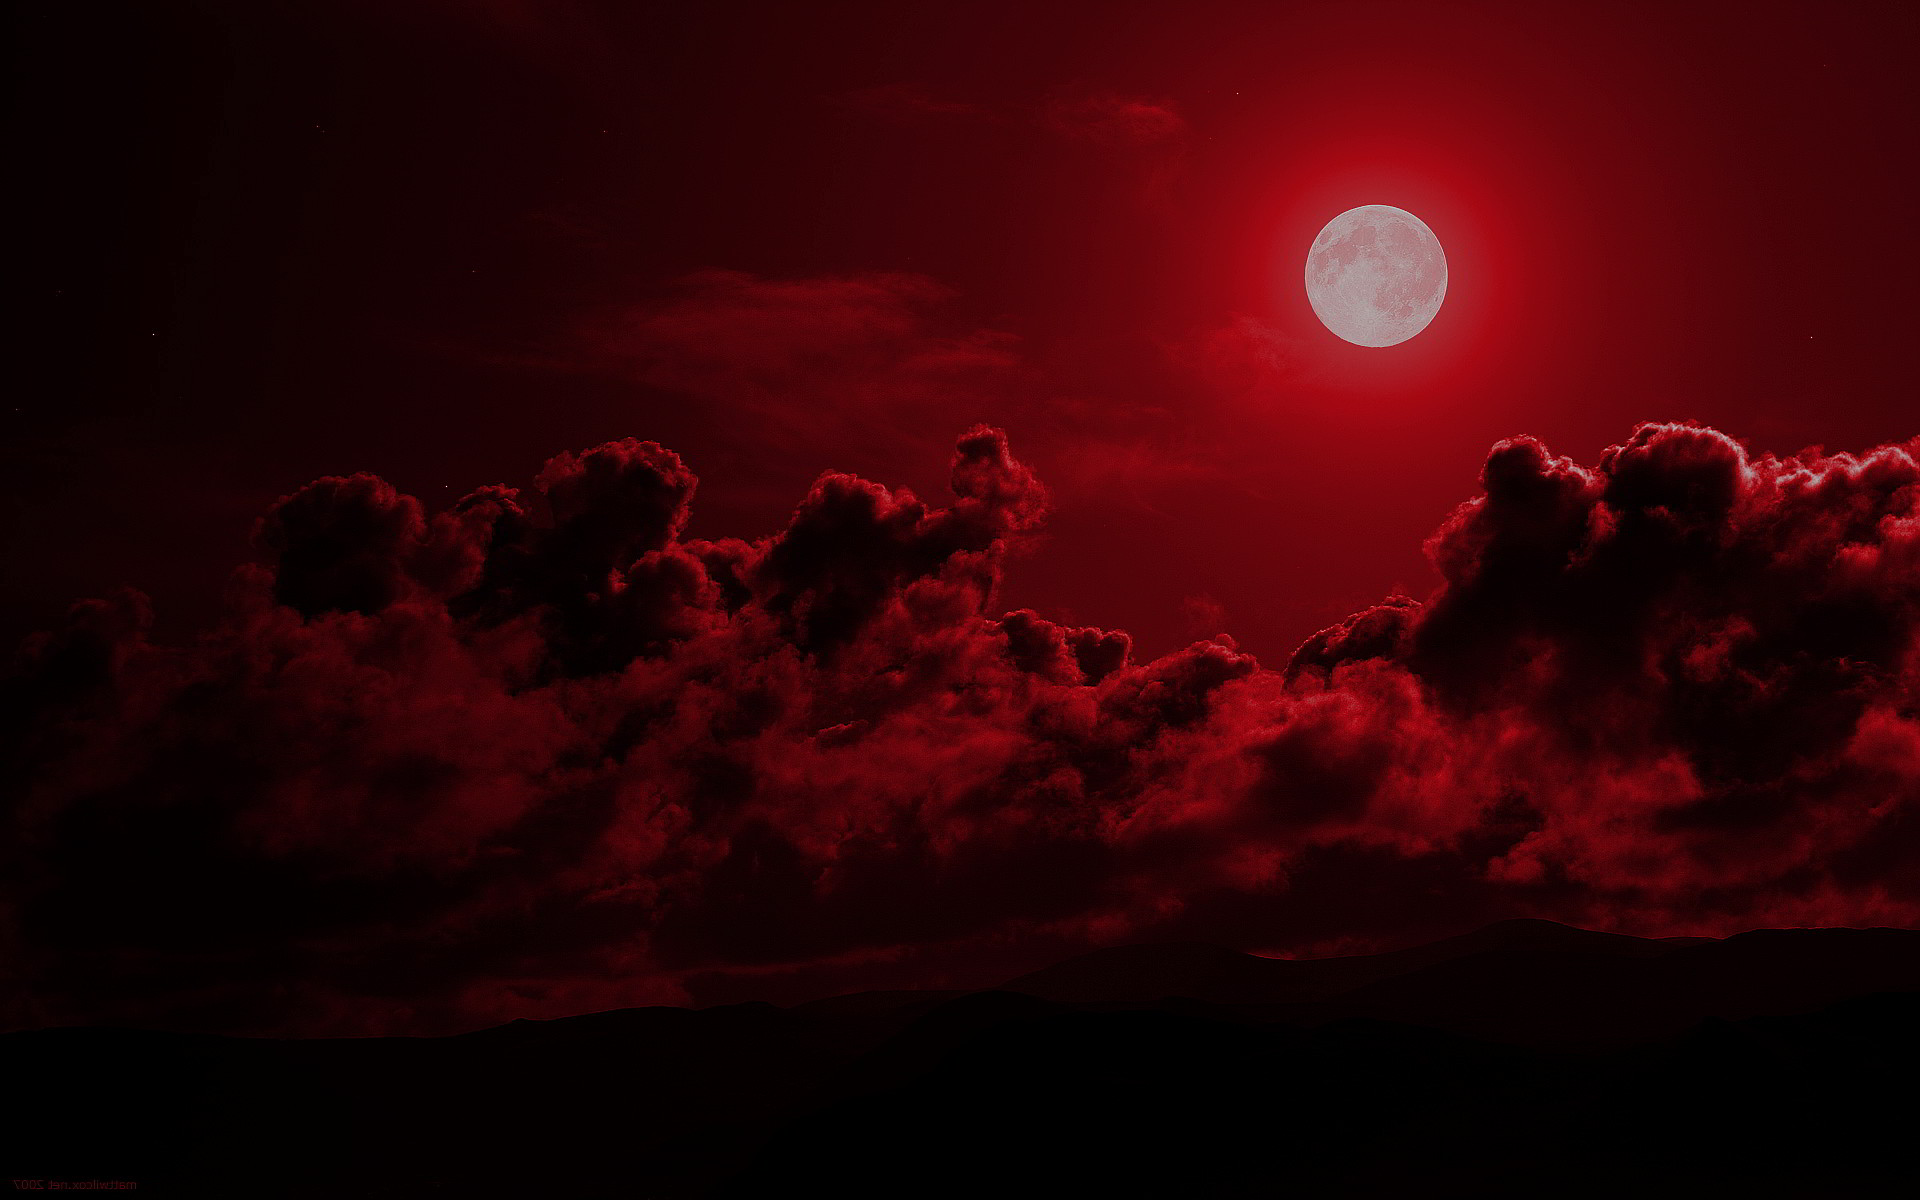 1920x1200 PC, Laptop 28 Red Moon Wallpapers in FHD-FYT76, Z.XSW Wallpapers